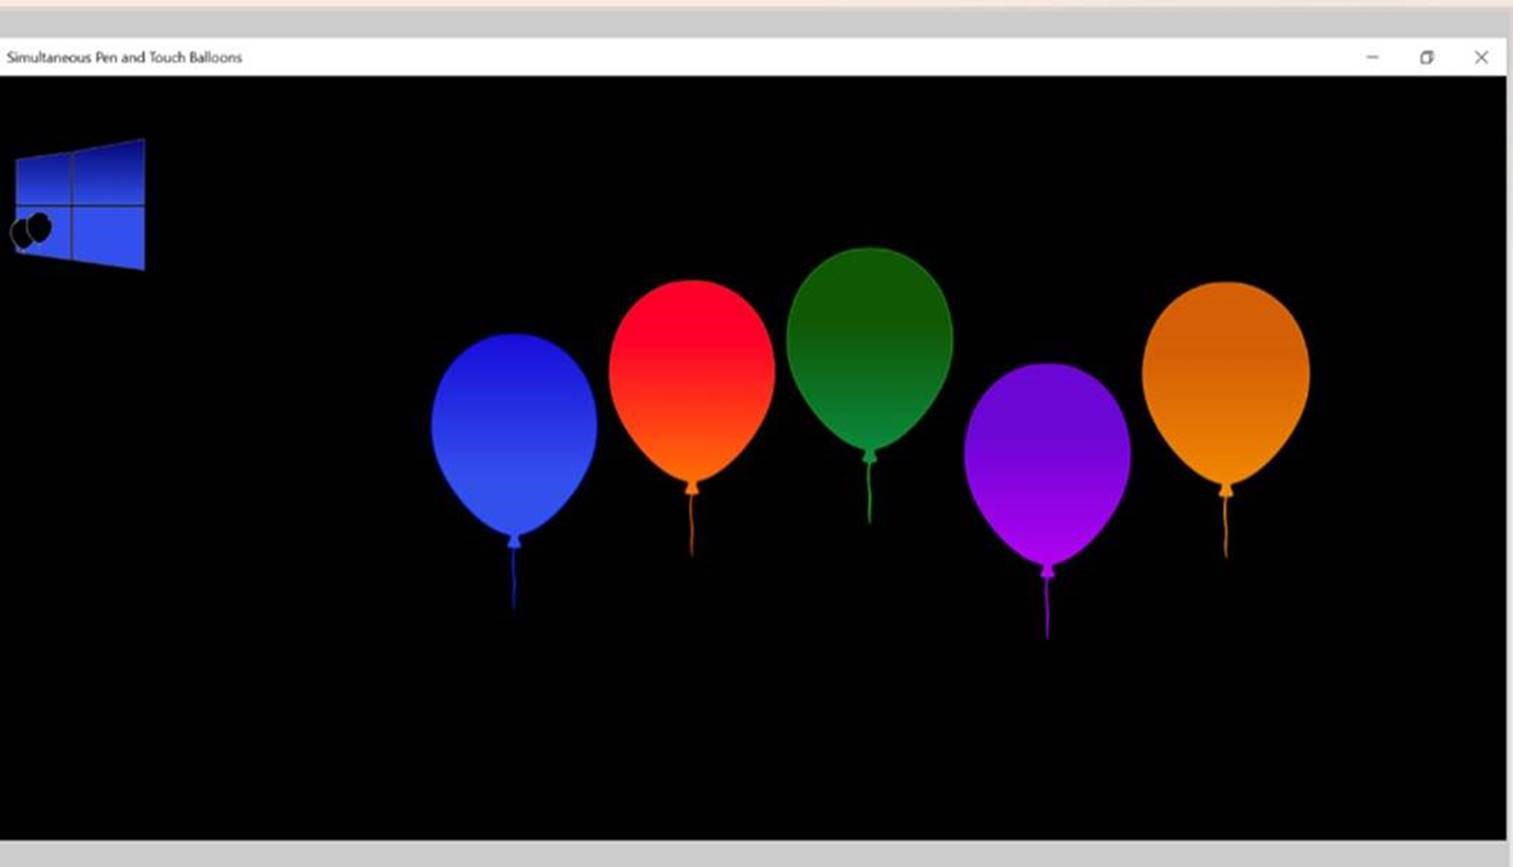 A screenshot showing the simultaneous pen and touch balloons app